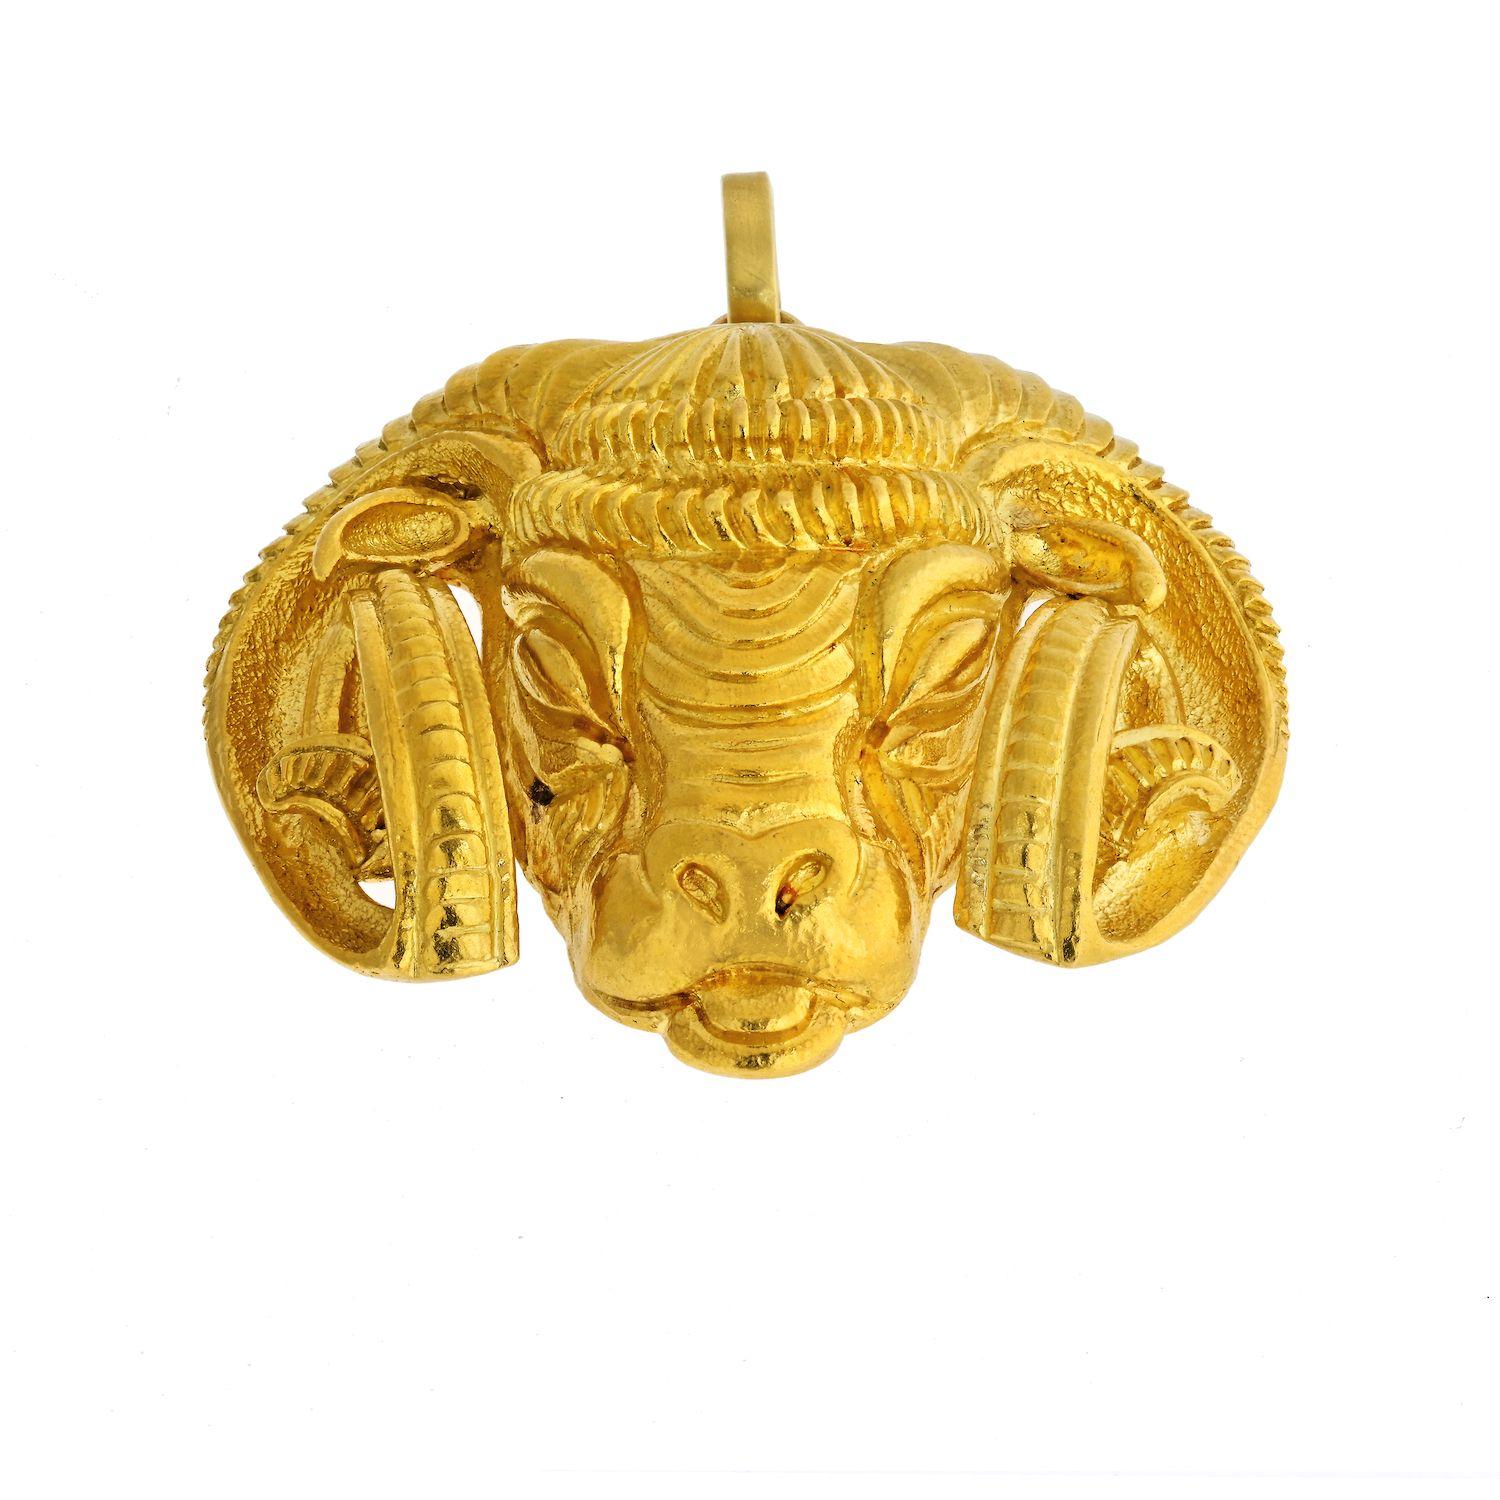 David Webb Zodiac Kingdom 18K Yellow Gold Gold Aries Ram Head Pendant. 
18k yellow gold fur pendant with foldable hinged bail, sculpted and as a Babylonian style ram head, Aries, 